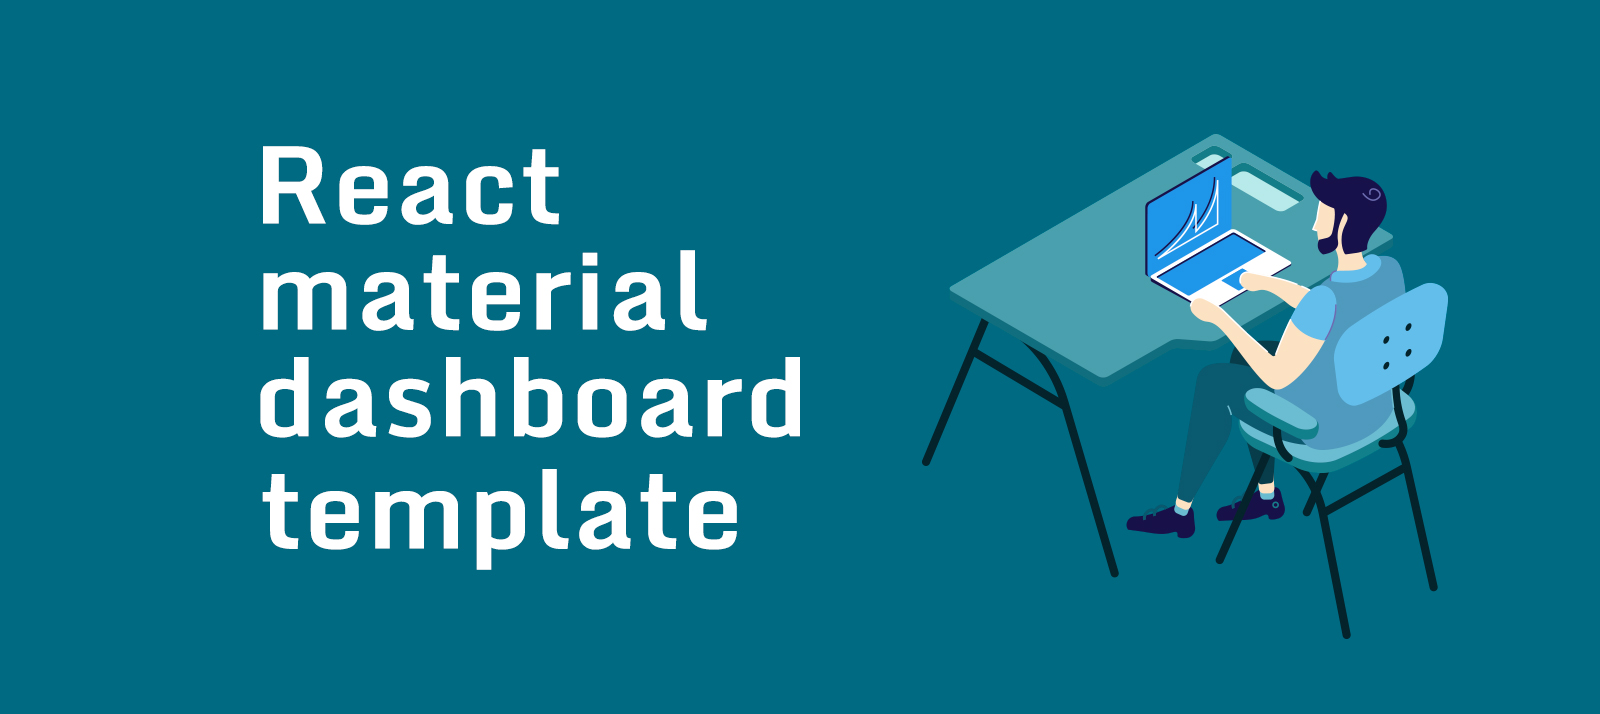  Best React Material Dashboard Templates Sure to Make a Big Impact in 2020    